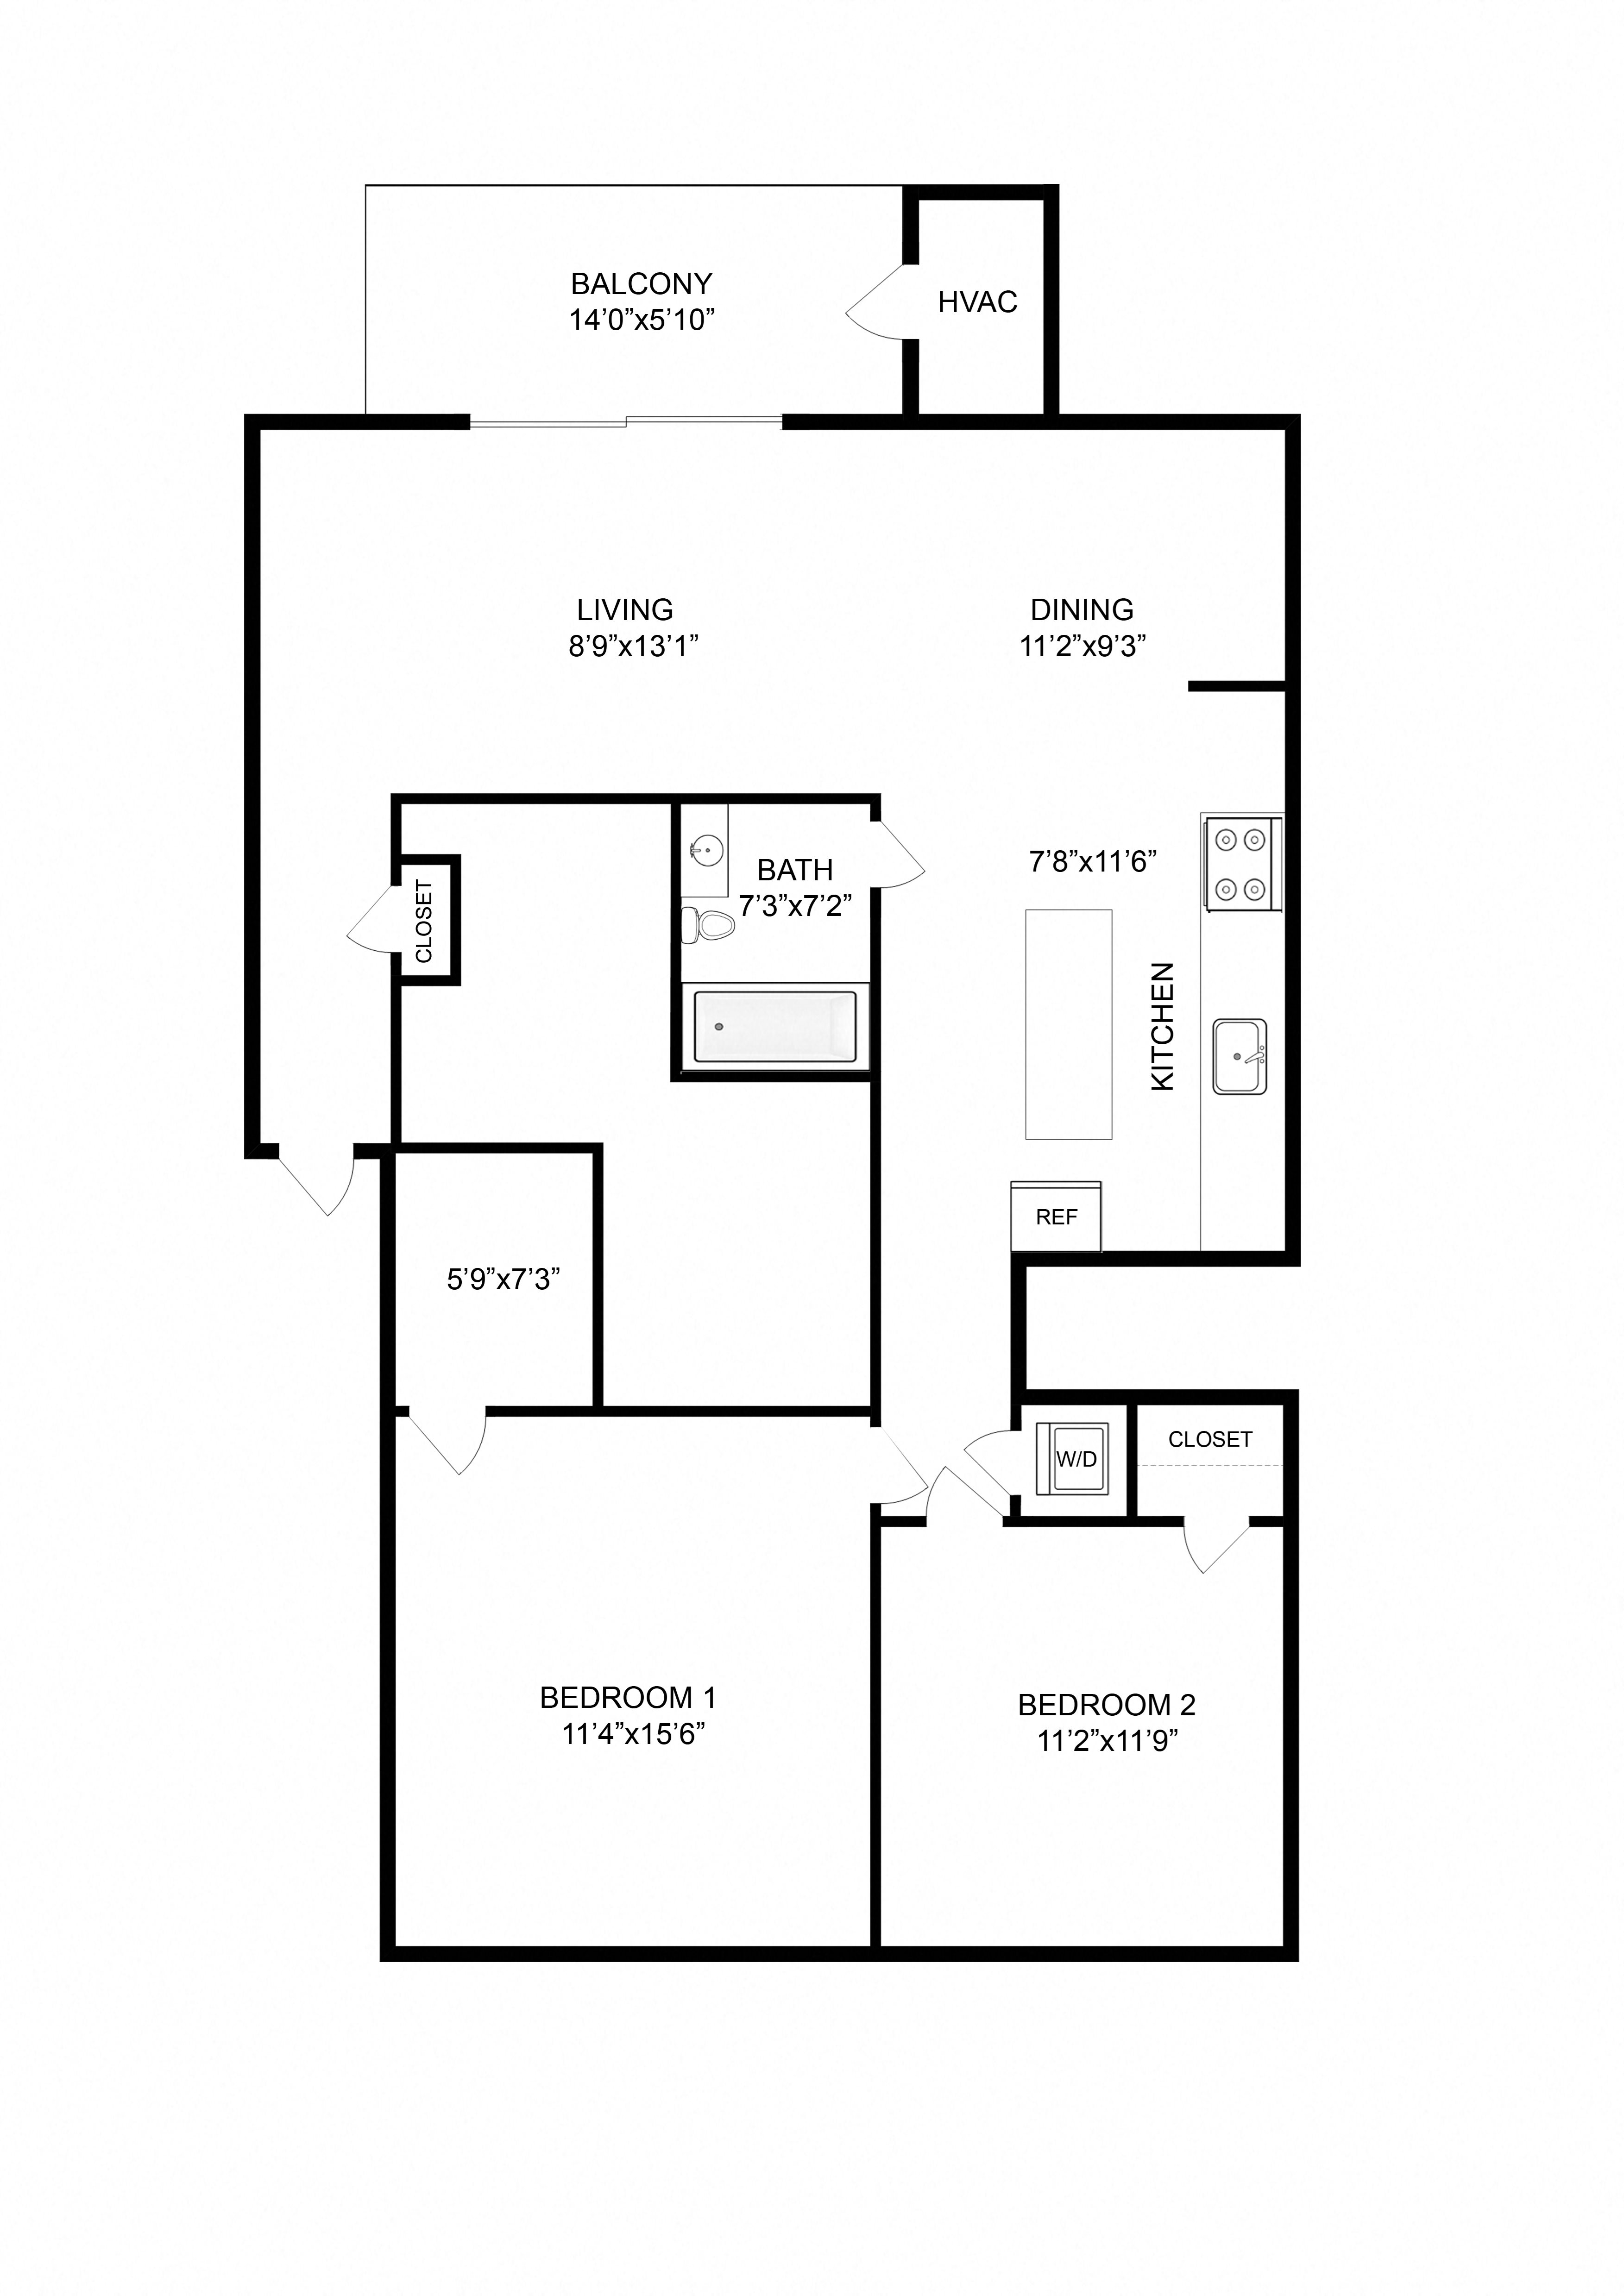 Floor Plans of The Cove at HDG in Havre De Grace, MD